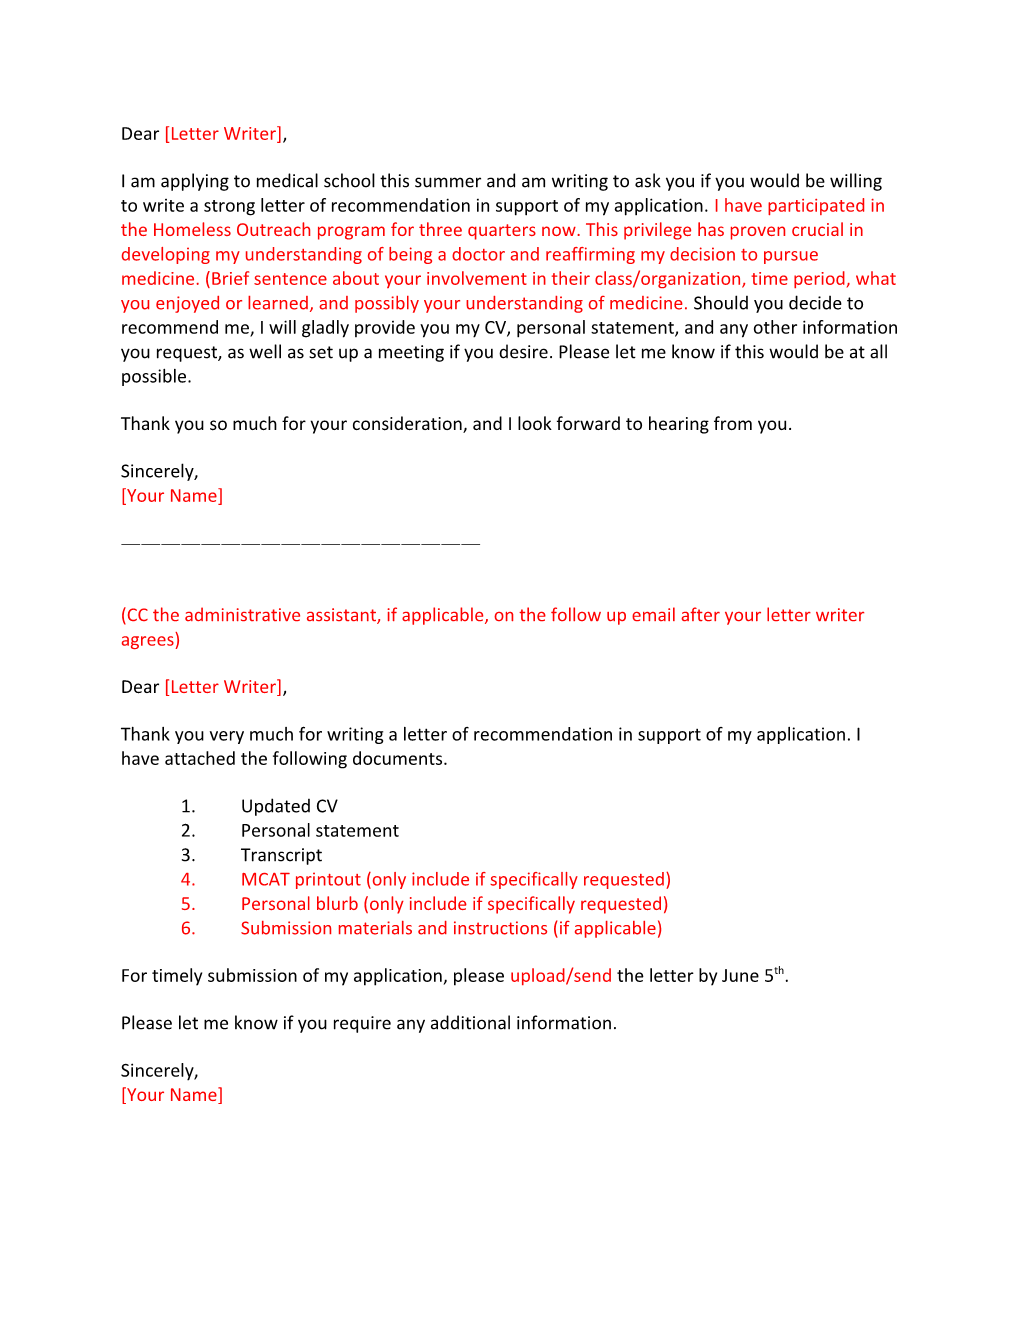 Letter of Recommendation Request Templates